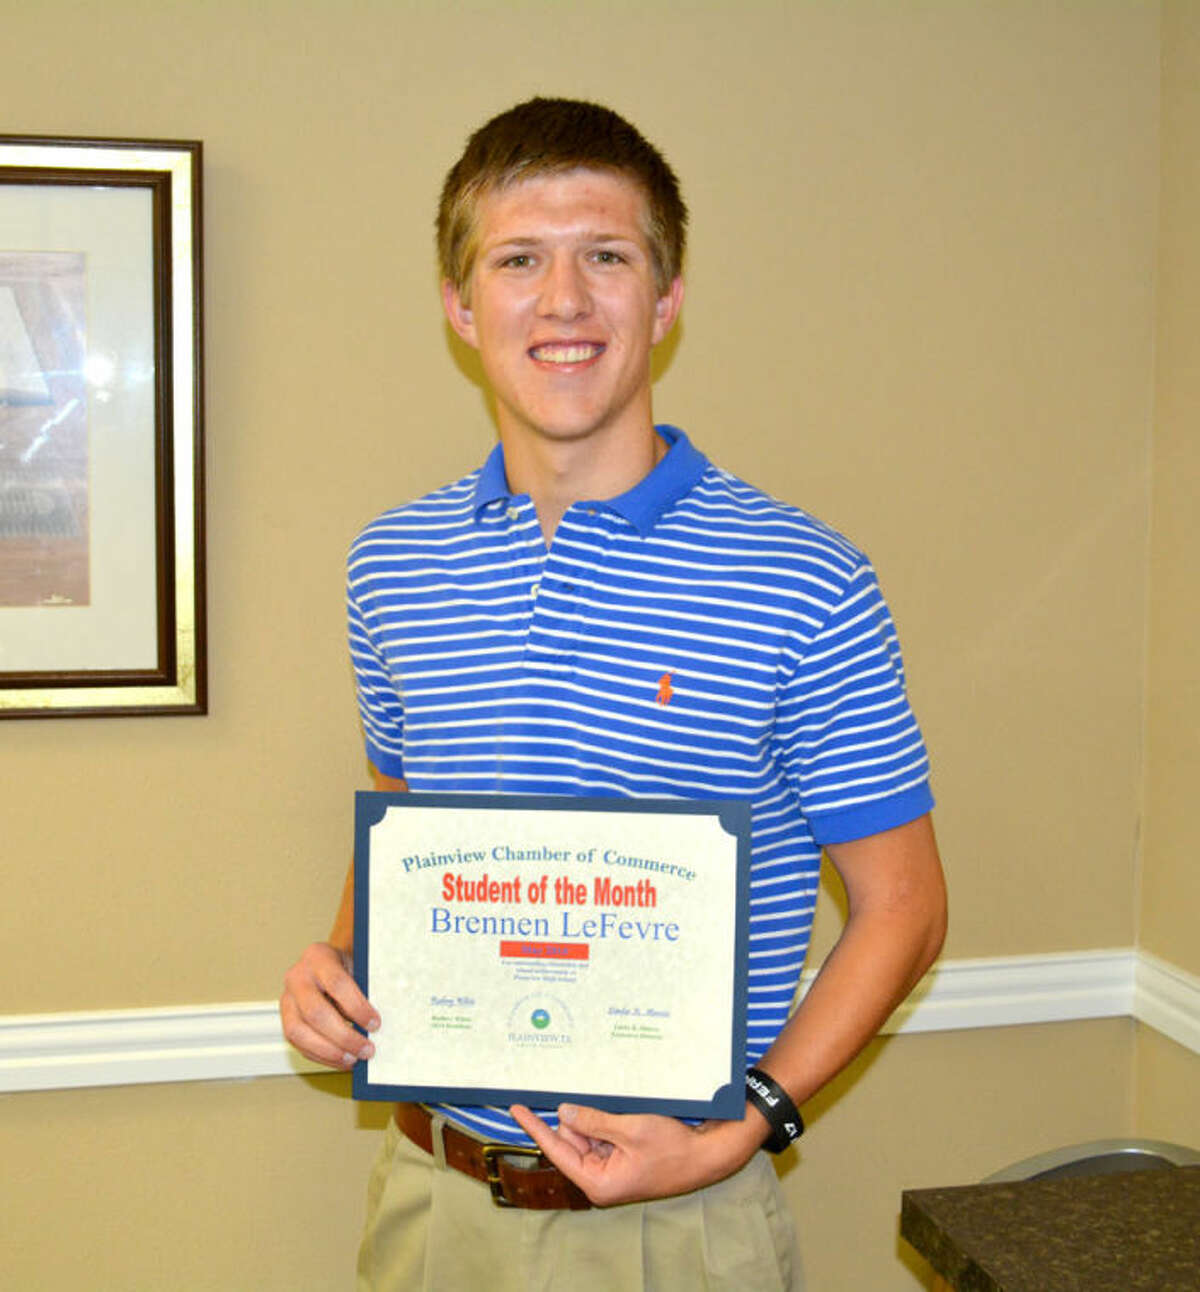 Doug McDonough/Plainview HeraldBrennen LeFevre, a senior at Plainview High School, was introduced Tuesday as the Chamber of Commerce Student of the Month. The 18-year-old son of Chris and Michele LeFevre, he has been active in PHS athletics for the past four years, including three years in varsity football and one year as team captain. He has been in National Honor Society for three years (two years as officer), FFA four years (three years as officer), National Technical Honor Society for two years, Student Council one year and choir for two years. His awards include All-District Honorable Mention in football (2012), All-District Second Team Cornerback (2013), All-State Academic Football First Team (2013), All-South Plains Second Team Cornerback (2013), football team captain (2013), state qualifier in Land Judging (2010-11), Top 10 Individual Area Land Judging (2010-14), Area Qualifier for Chapter Conducting (2010-14), Merit P Award (2010-14), invitation to join National Society of High School Scholars (2013), WTAMU Academic Scholarship ($12,000 over a four-year period), PHS Class of 1956 Scholarship, ranked fifth in the PHS Class of 2014. LeFevre has been an FFA officer since 2012 and NHS officer since 2012. He has been involved on the Centennial Bank Junior Board of Directors, Salvation Army bell ringer, Read First, First United Methodist Church Youth Group and participated in a mission trip to Moore, Okla., in March 2014. His hobbies include spending time with family and friends, and being active in his church and its youth group. He plans to attend West Texas A&M University and pursue a degree in mechanical engineering.